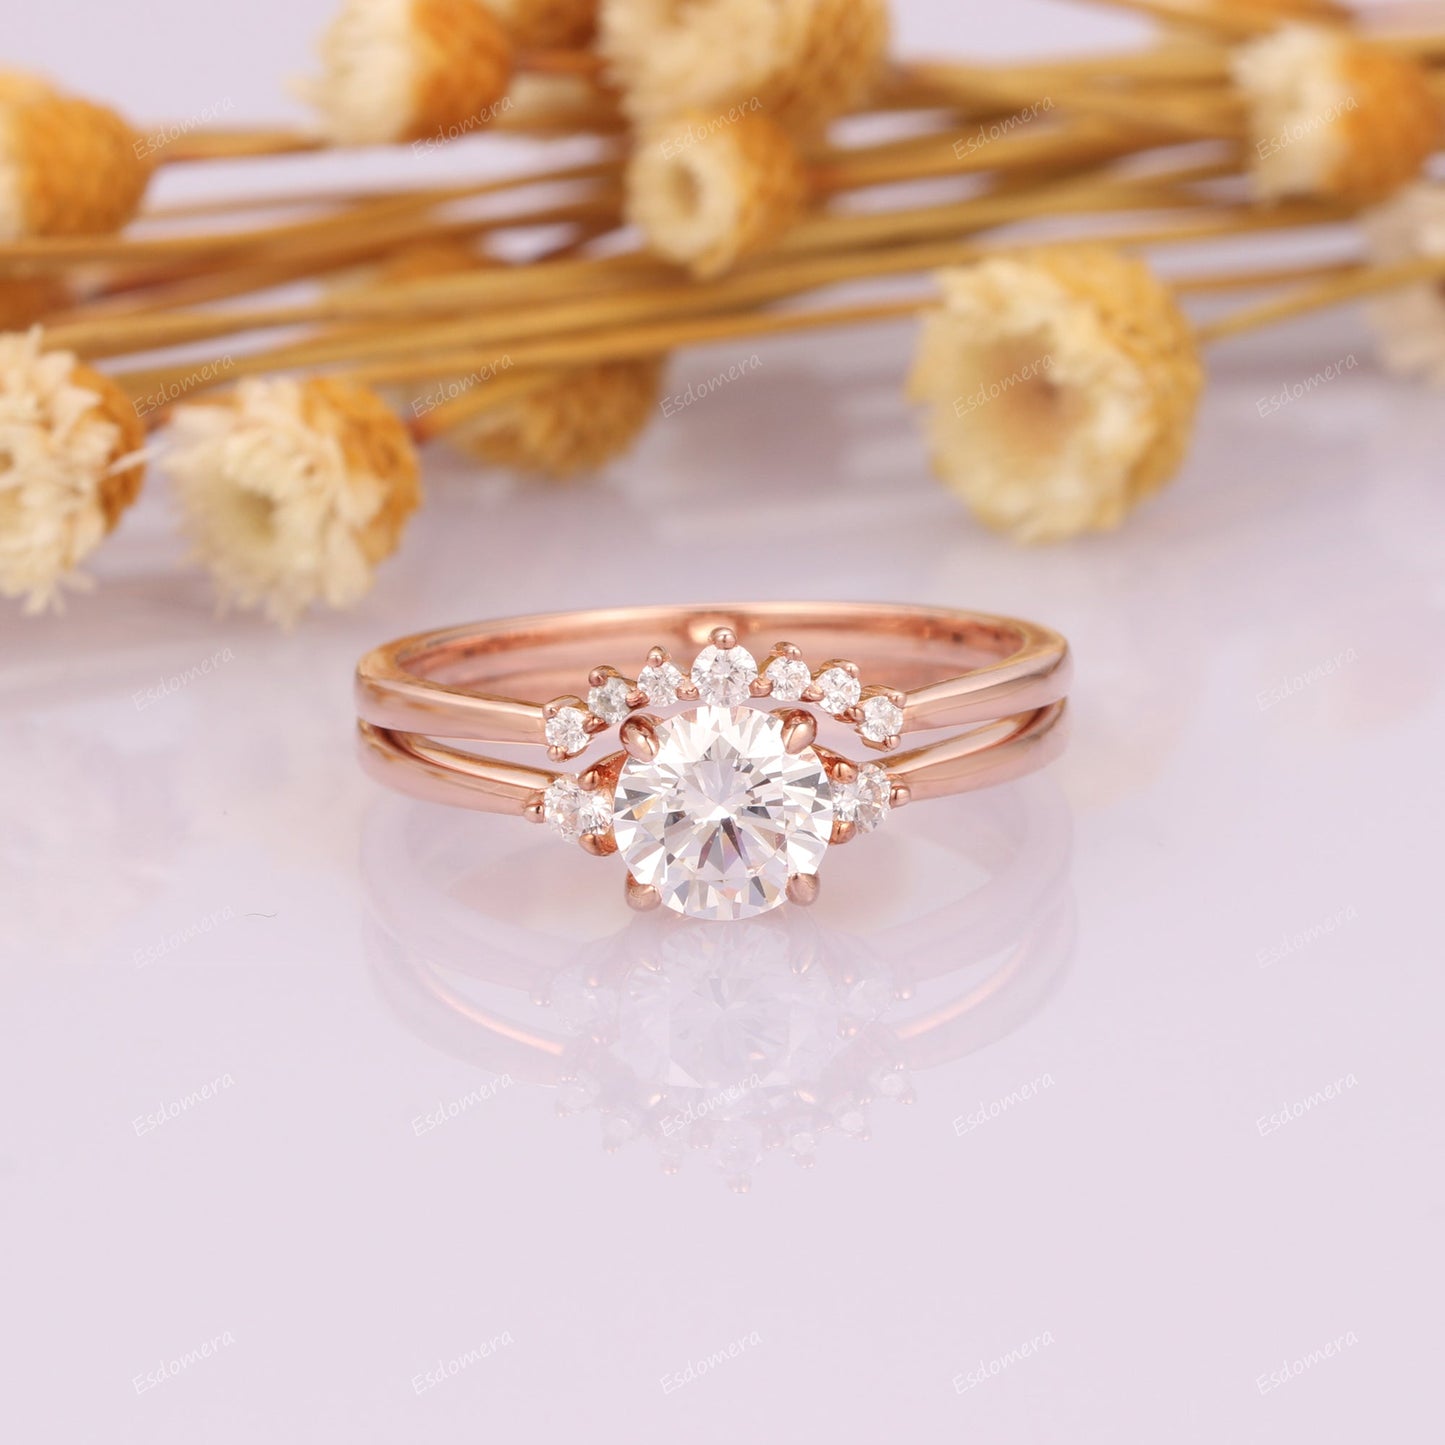 Classic 14k Rose Gold Moissanite Wedding Sets, Round Cut 6mm Moissanite Engagement Ring For Her, Curved Matching Band